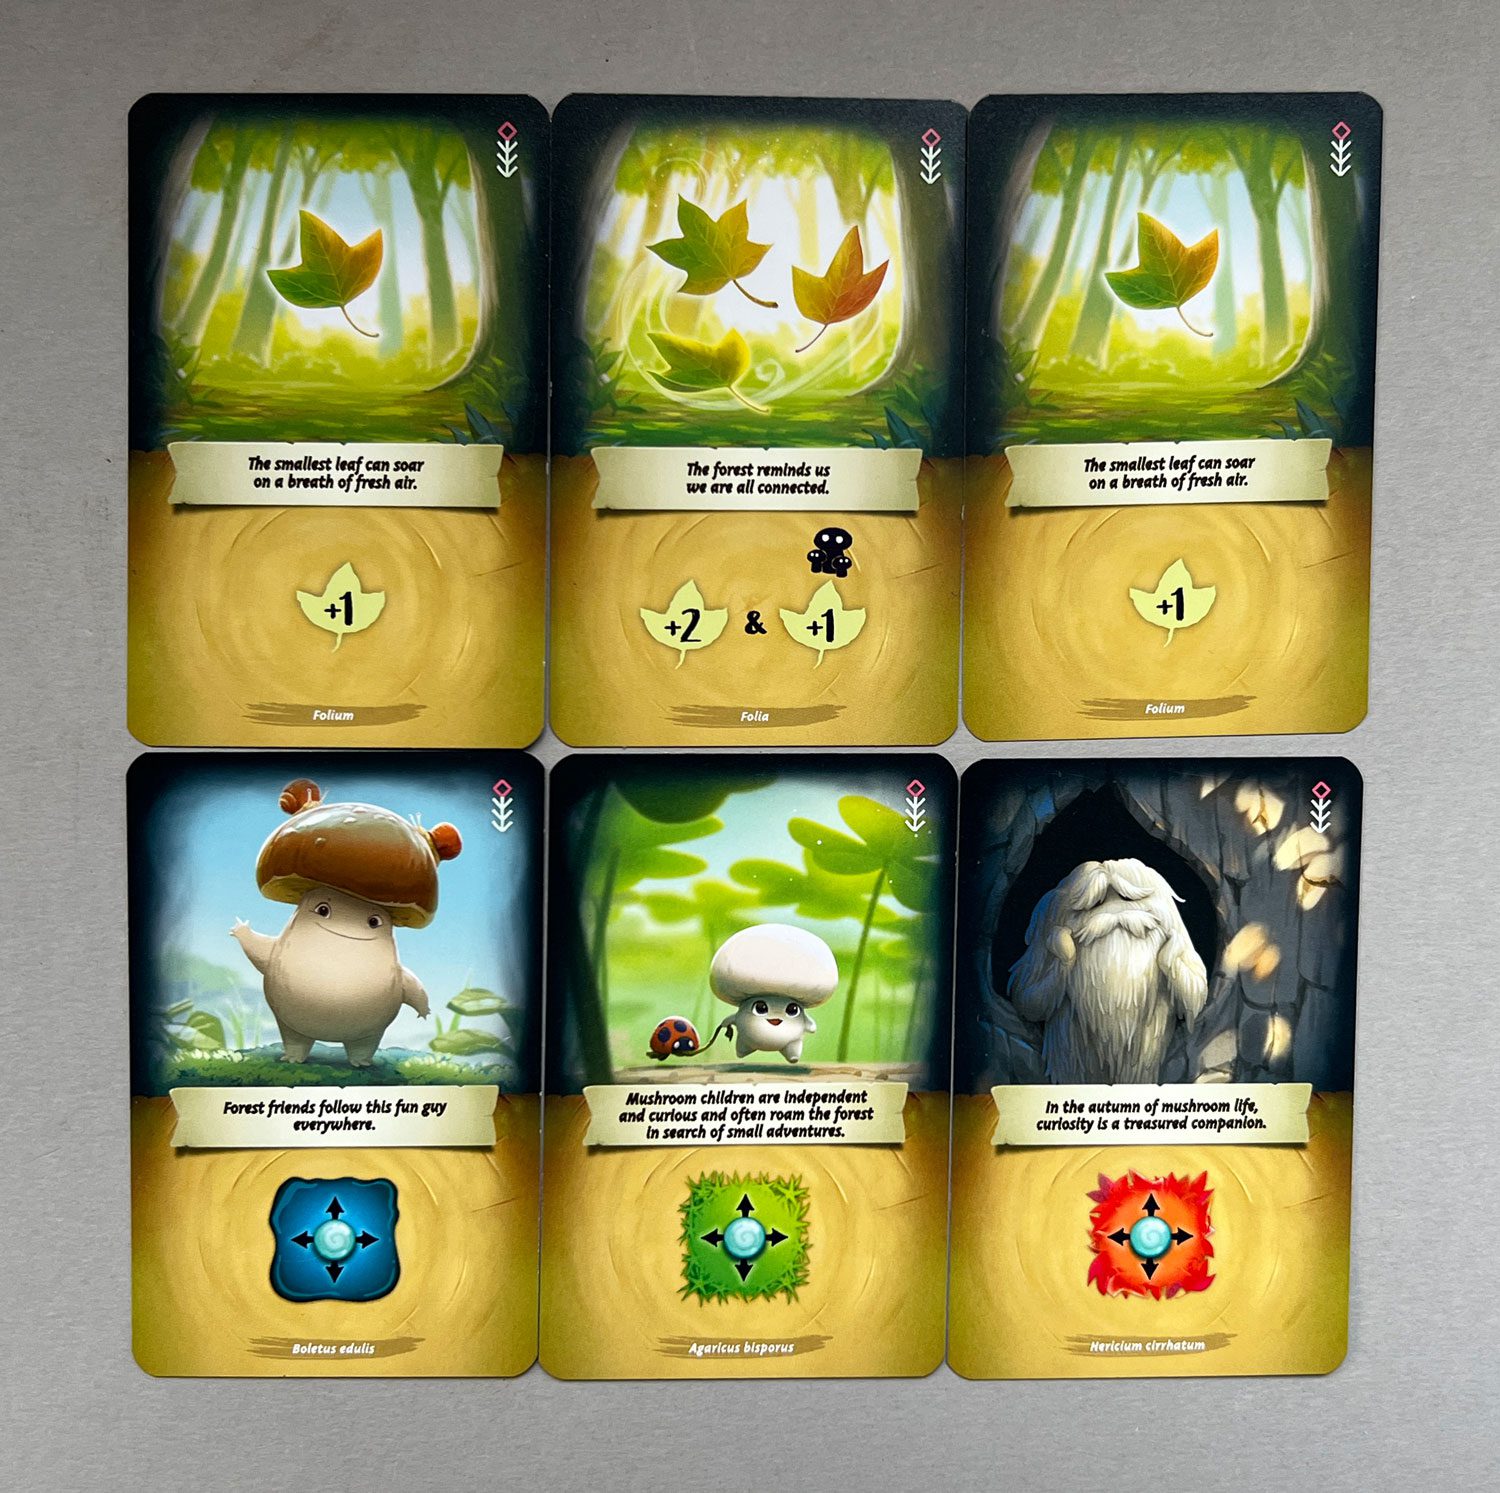 Each player starts with the same set of six cards.